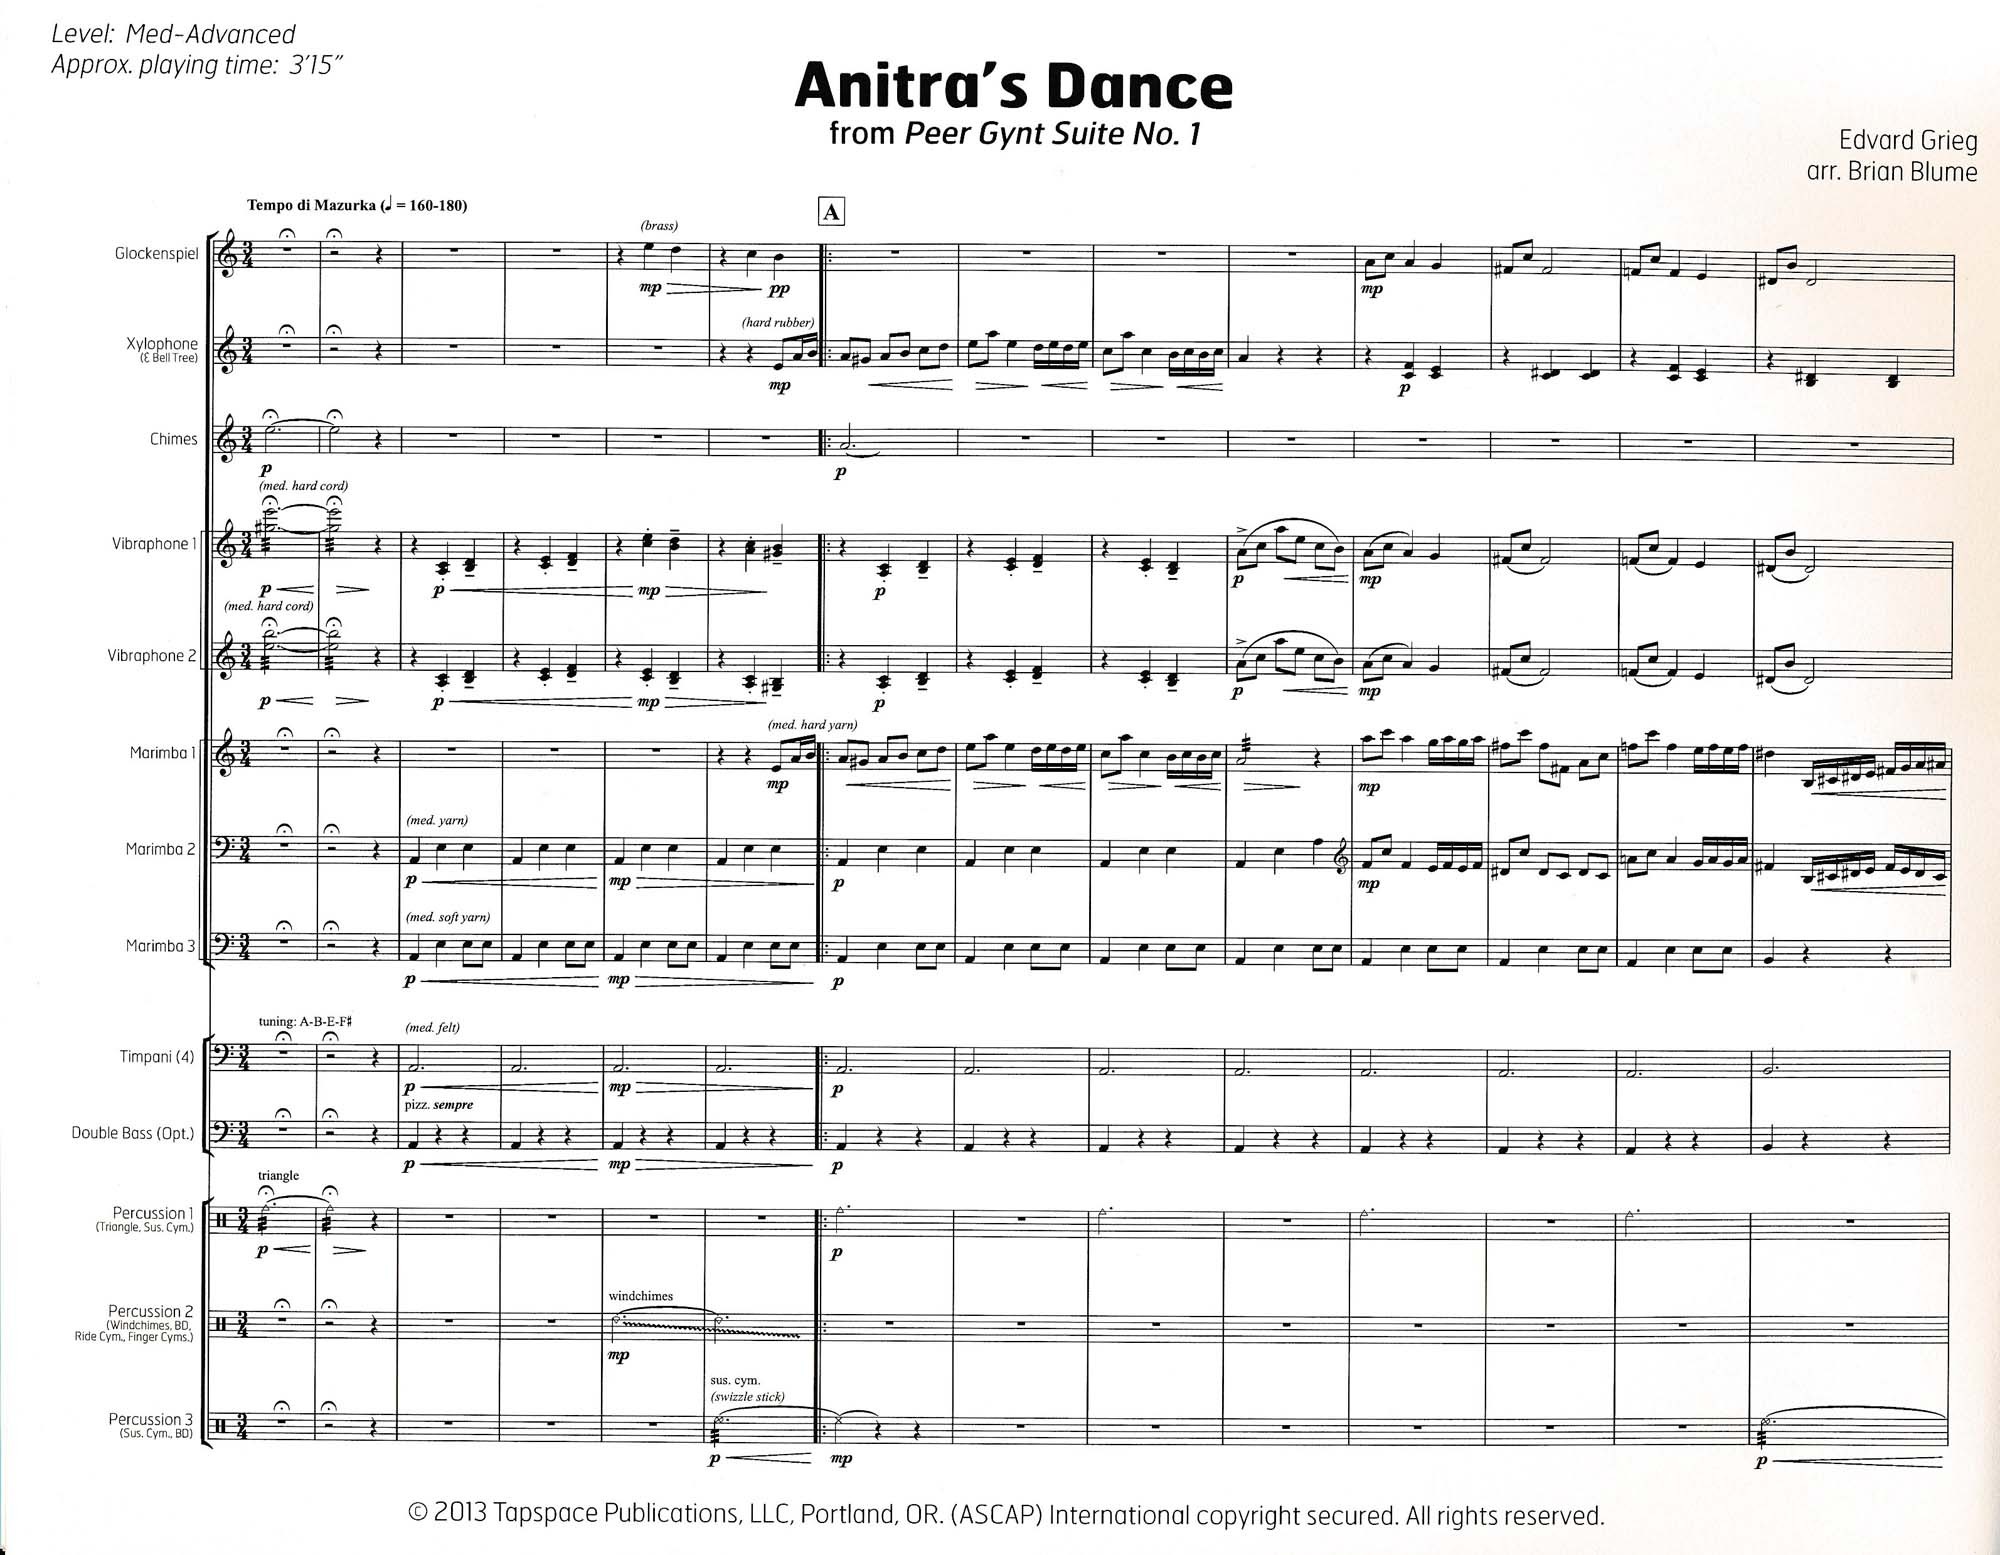 Anitra's Dance from Peer Gynt Suite No. 1 by Grieg arr. Brian Slawson